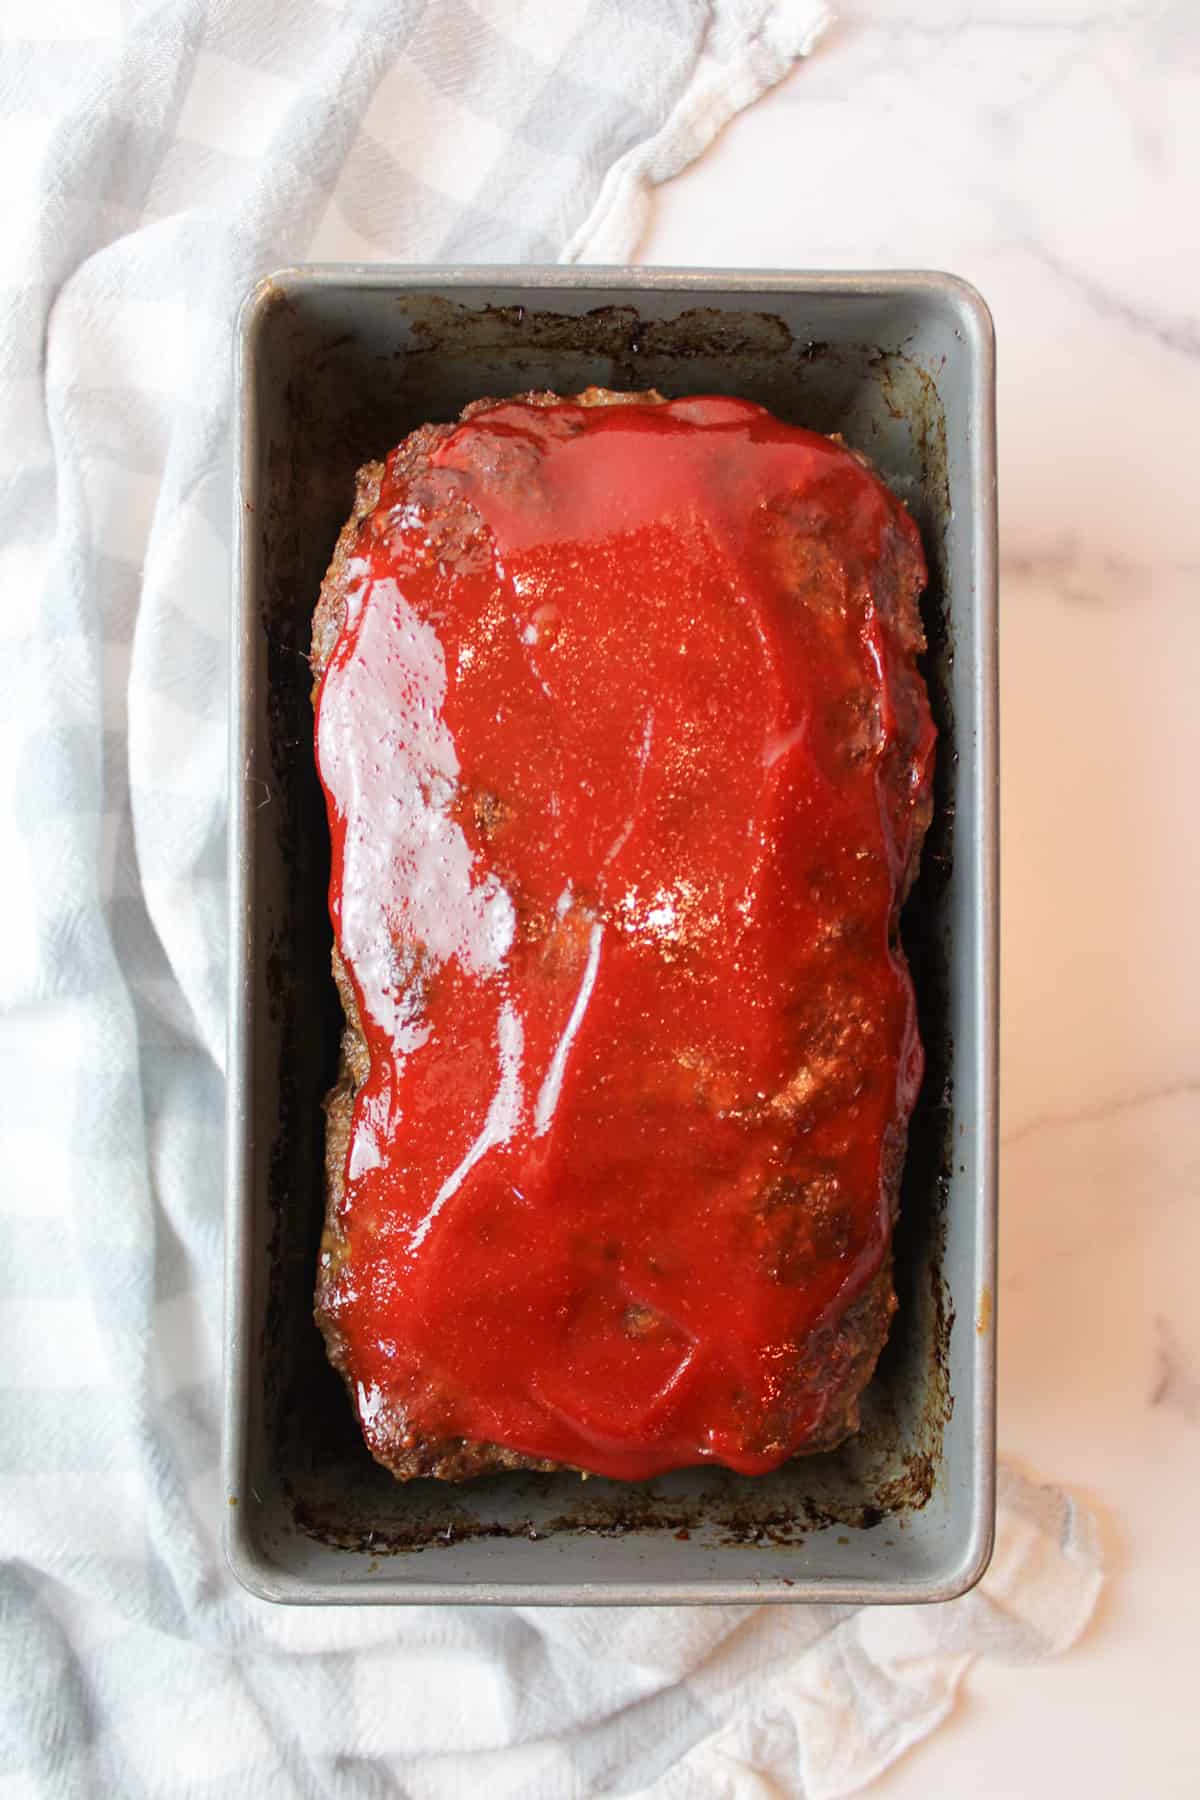 cooked meatloaf and ketchup topping in a bread loaf pan.